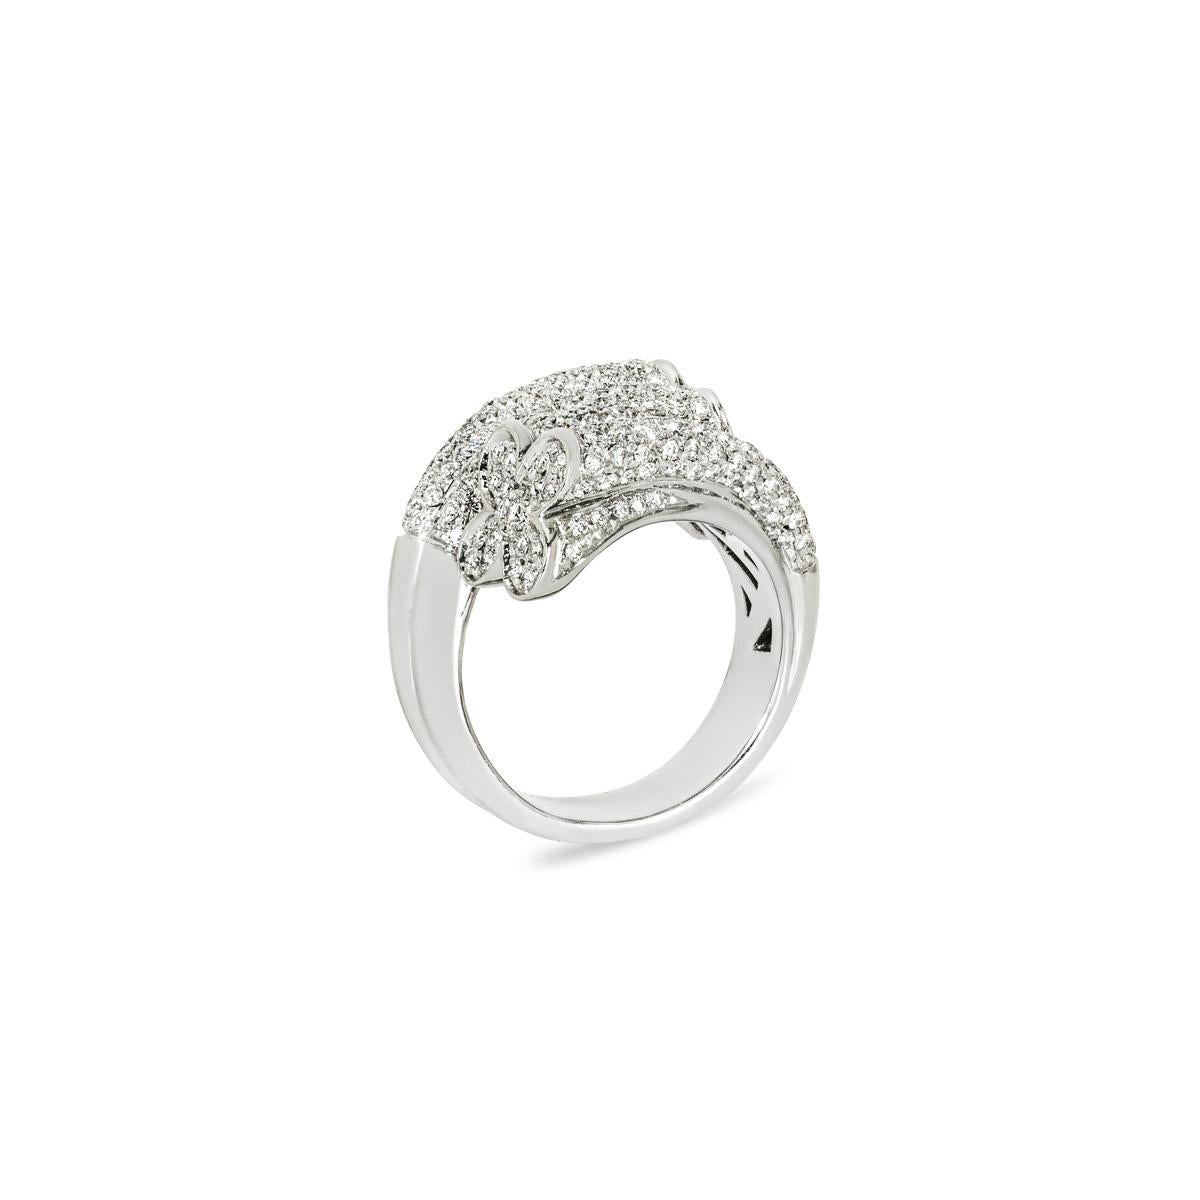 A sparkly 18k white gold diamond dress ring. The bypass style ring features a clover motif at each end and is encrusted with 248 round brilliant cut diamonds with an approximate total weight of 3.22ct, F-G colour and VS clarity. The ring tapers down